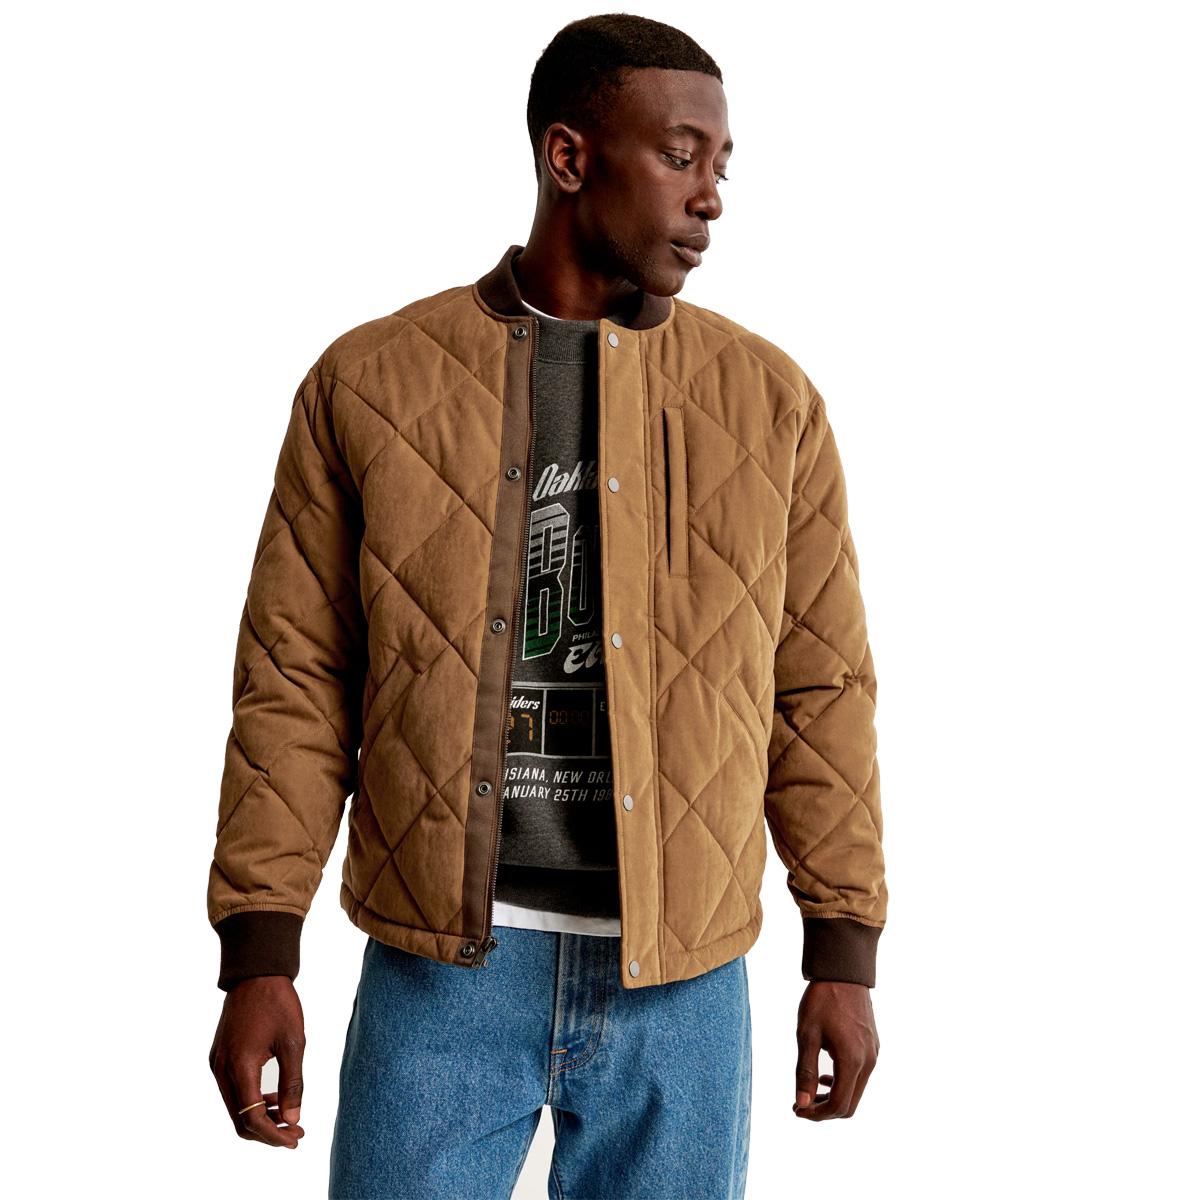 Abercrombie and Fitch Mens Quilted Liner Jacket for $46.74